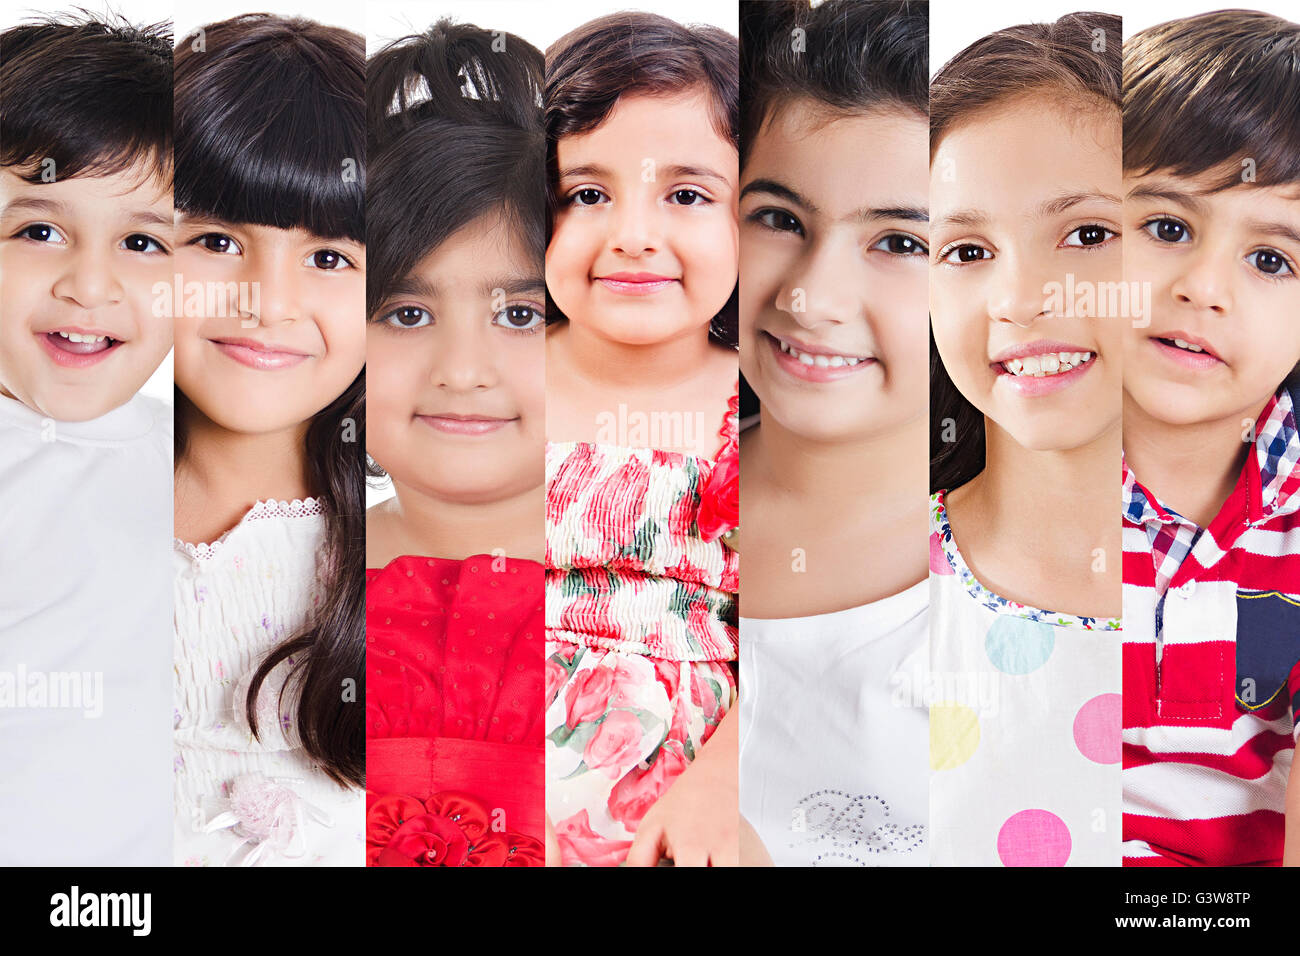 Boys Digitally Enhanced Diversity Girls Groups or Crowds Kids Only Miscellaneous Montage Photography Picture Stock Photo